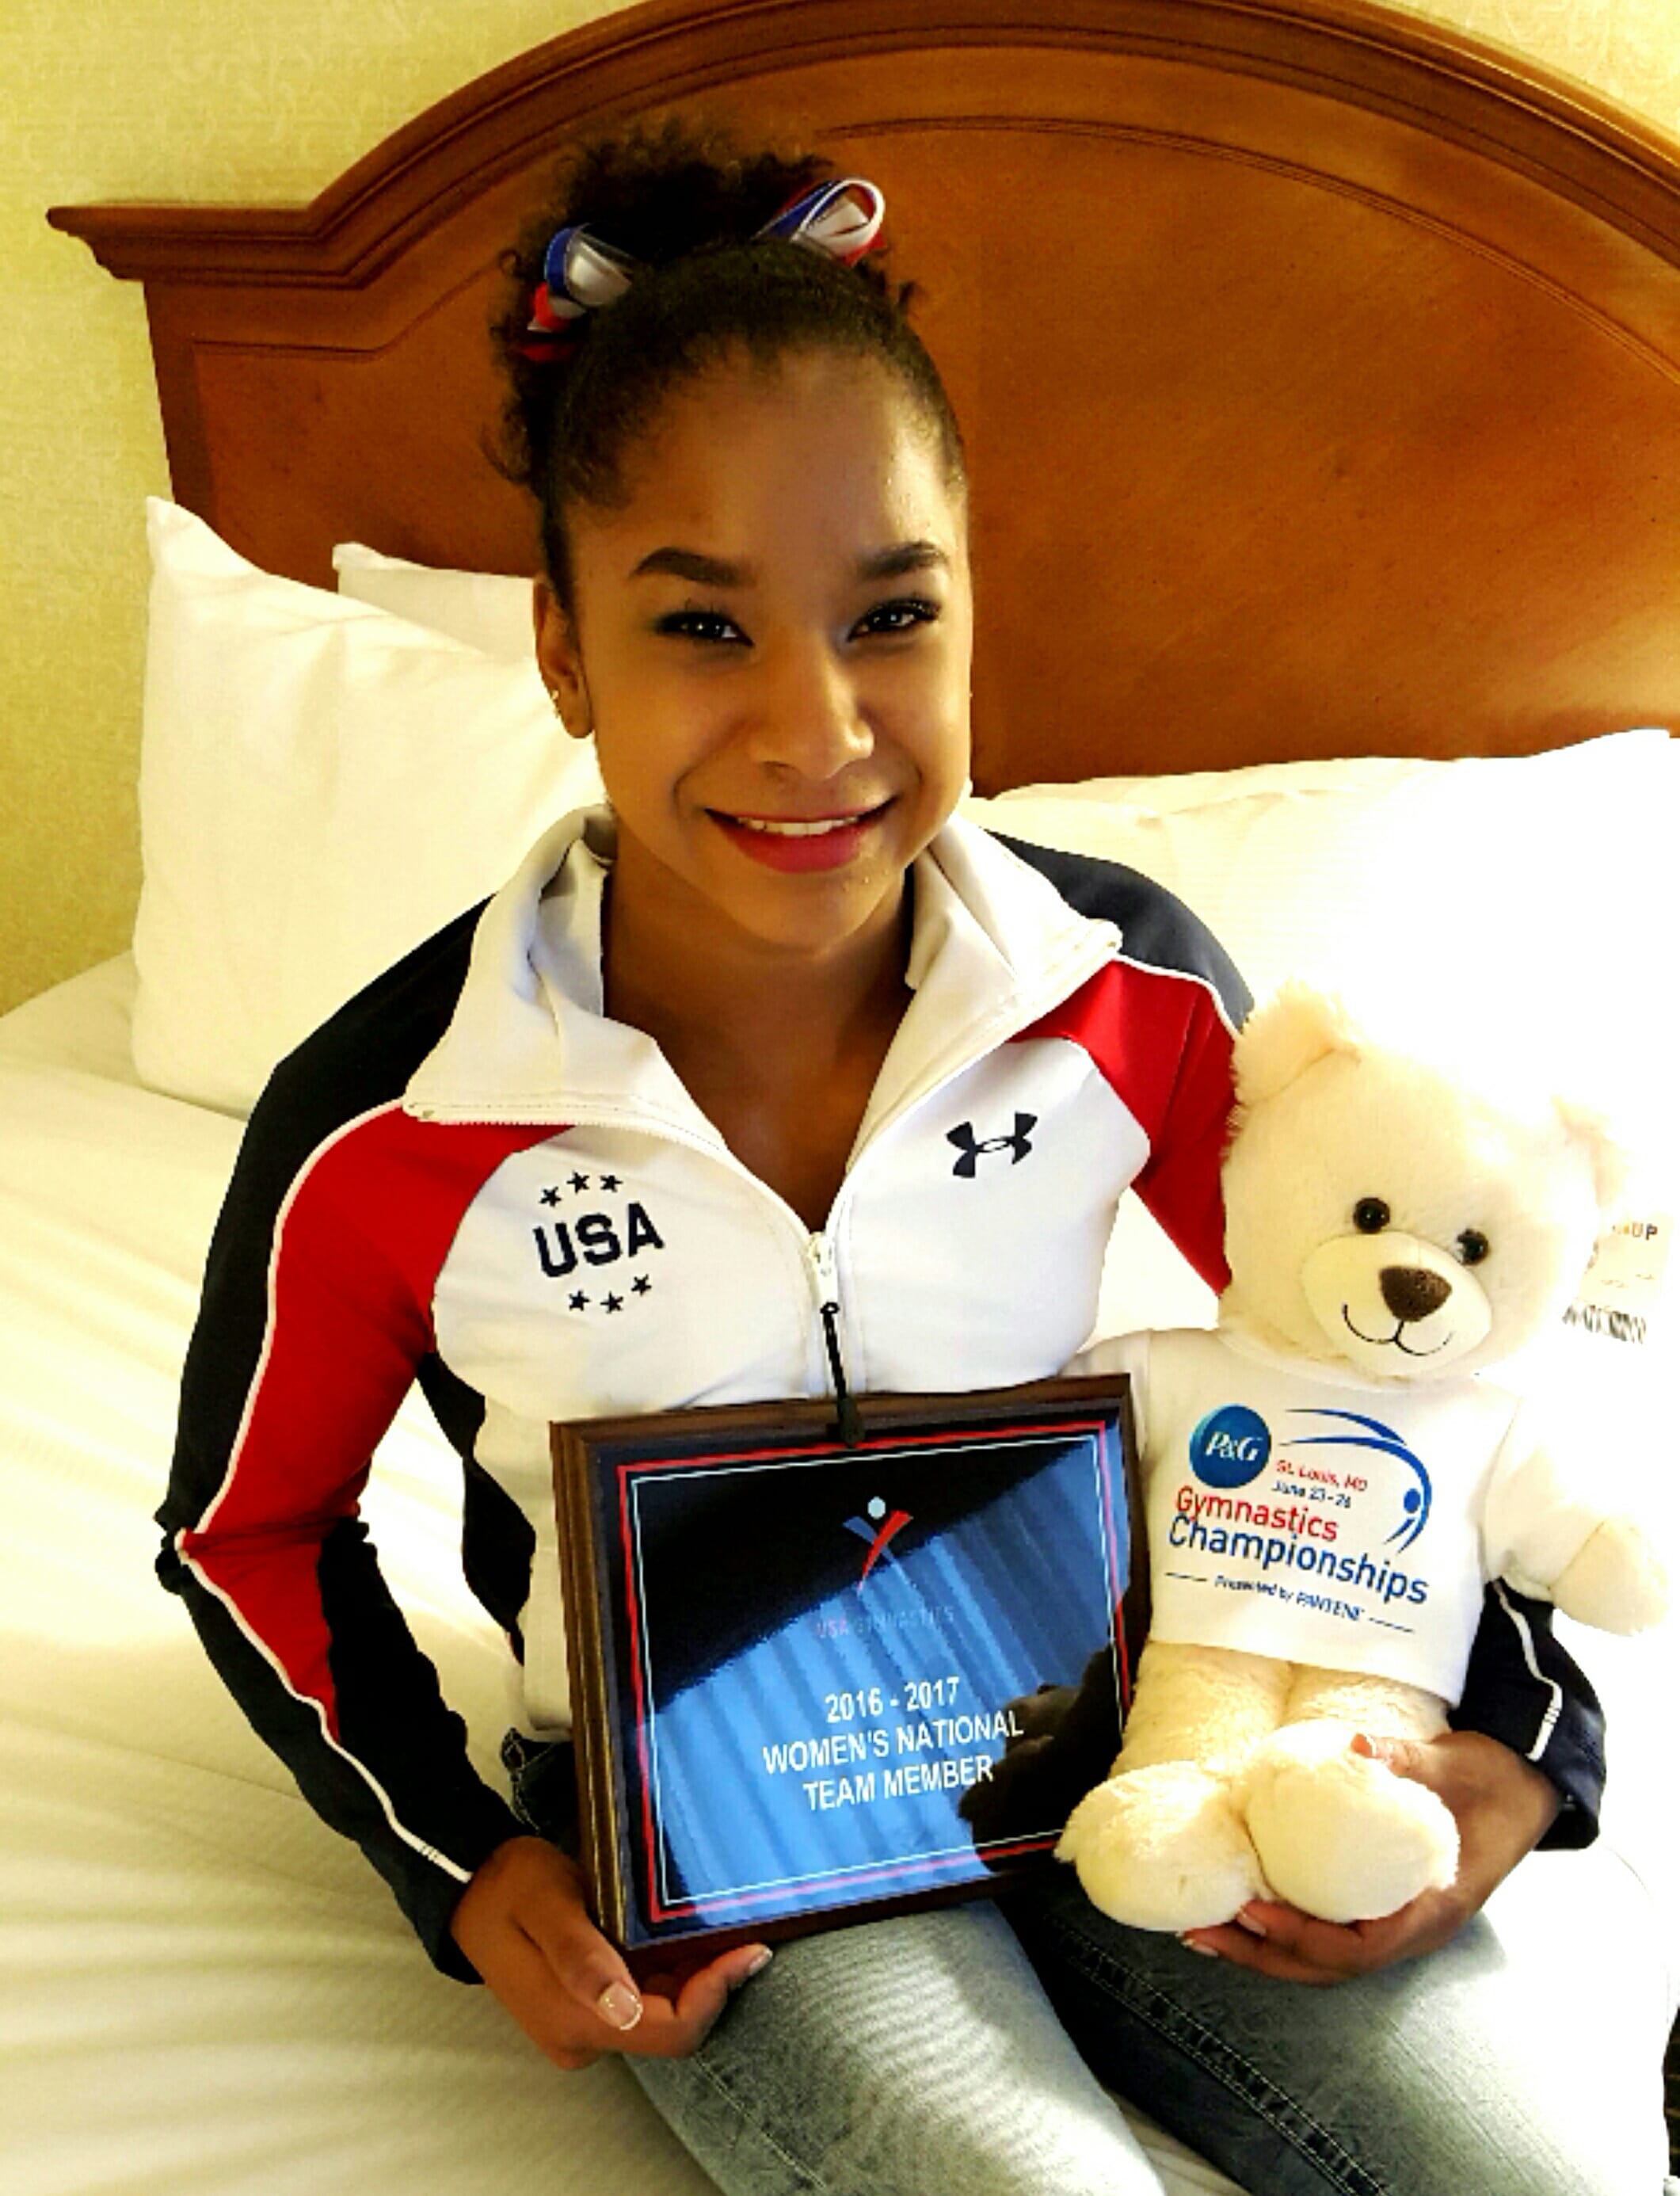 Vancouver's Jordan Chiles shows her awards for making the 2016 USA Junior National gymnastics team.